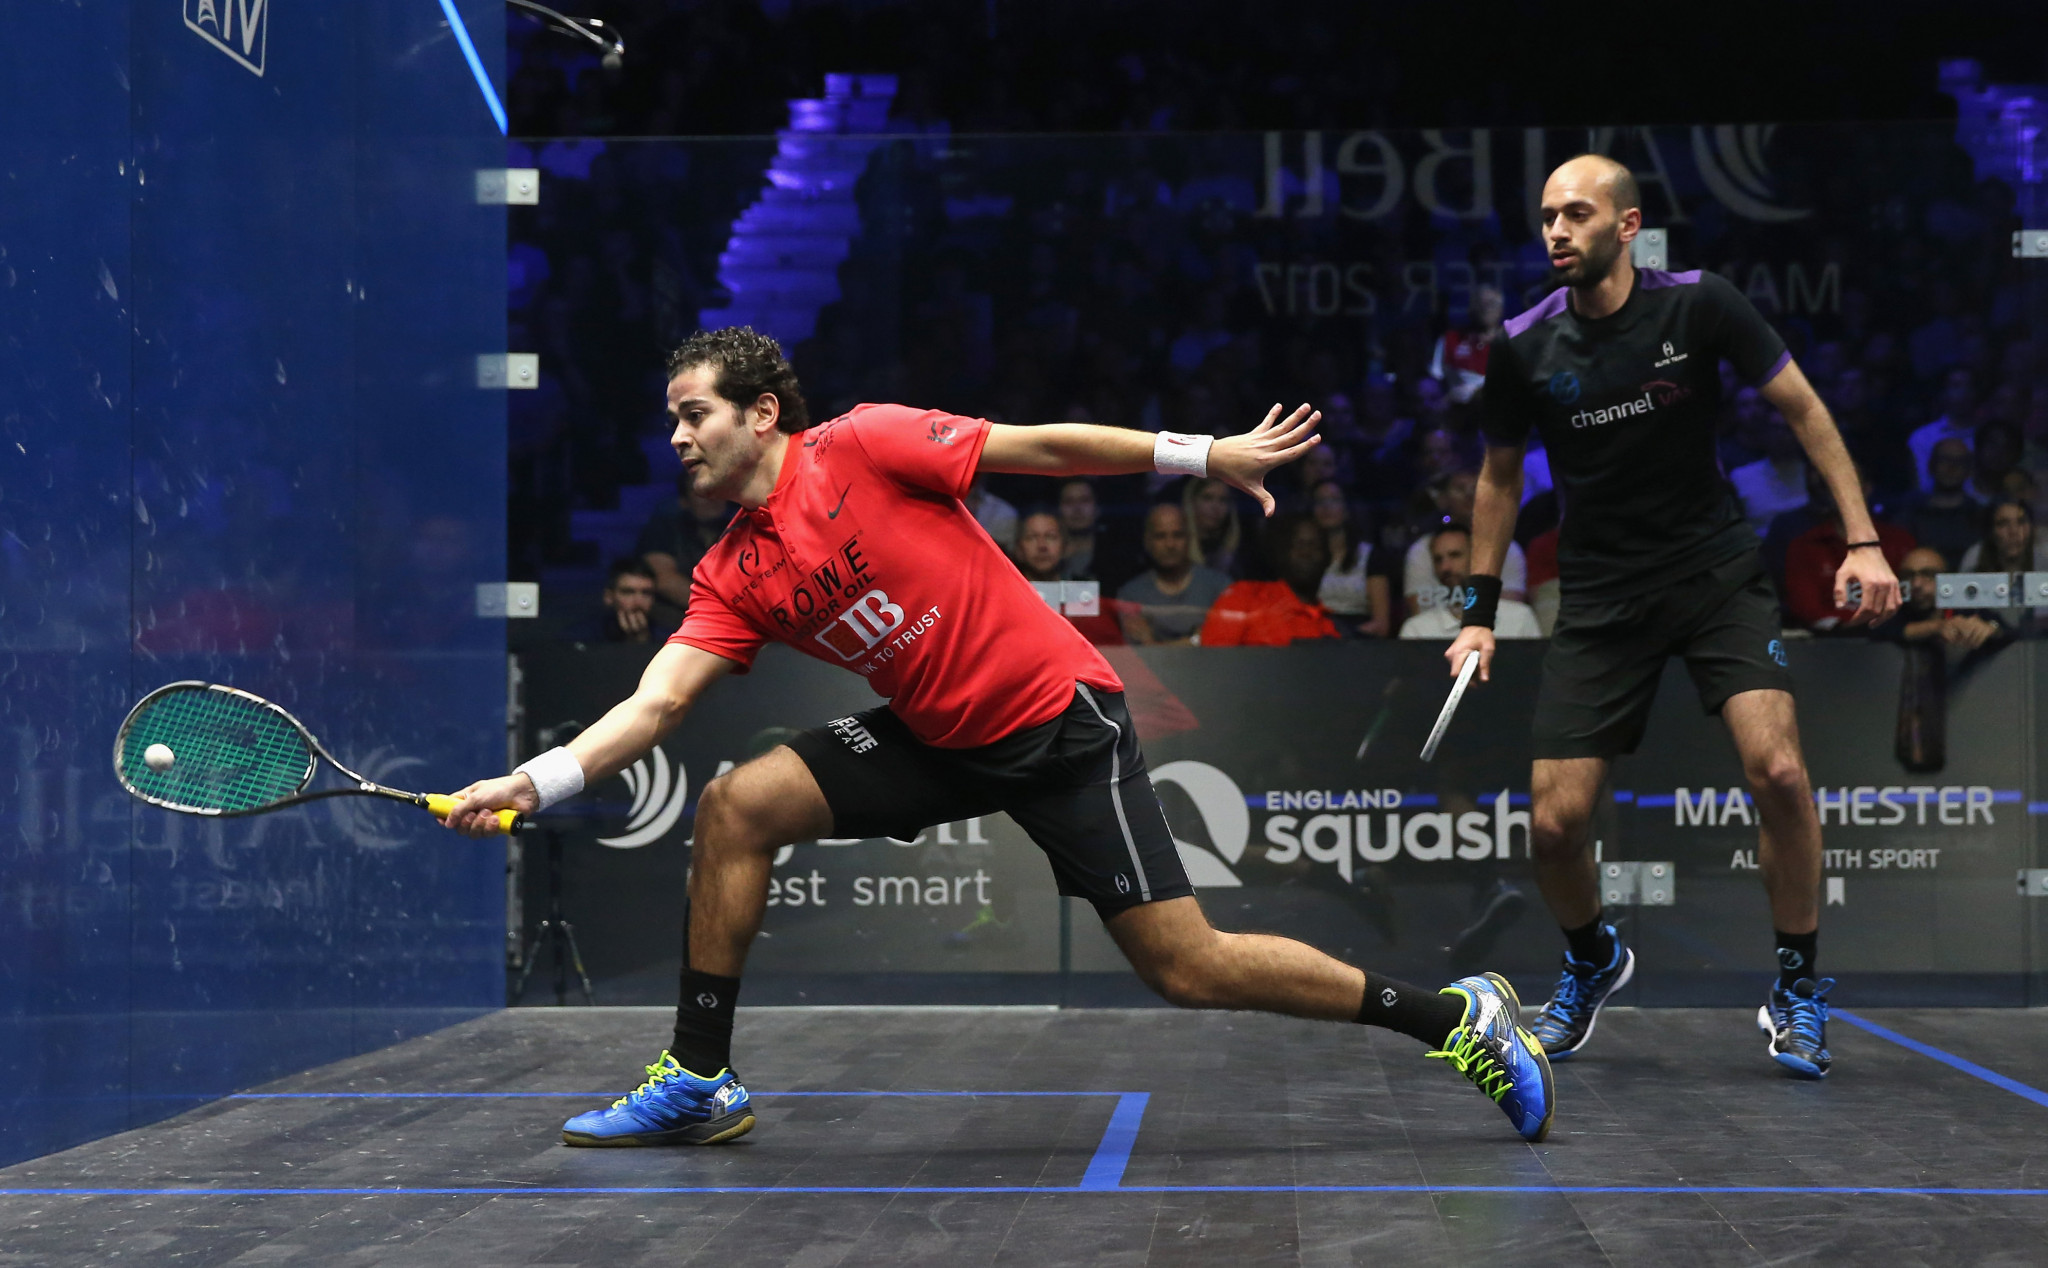 Egypt's Karim Abdel Gawad has moved back into the top five of the PSA men's world rankings following his victory at the Black Ball Squash Open in Cairo ©Getty Images